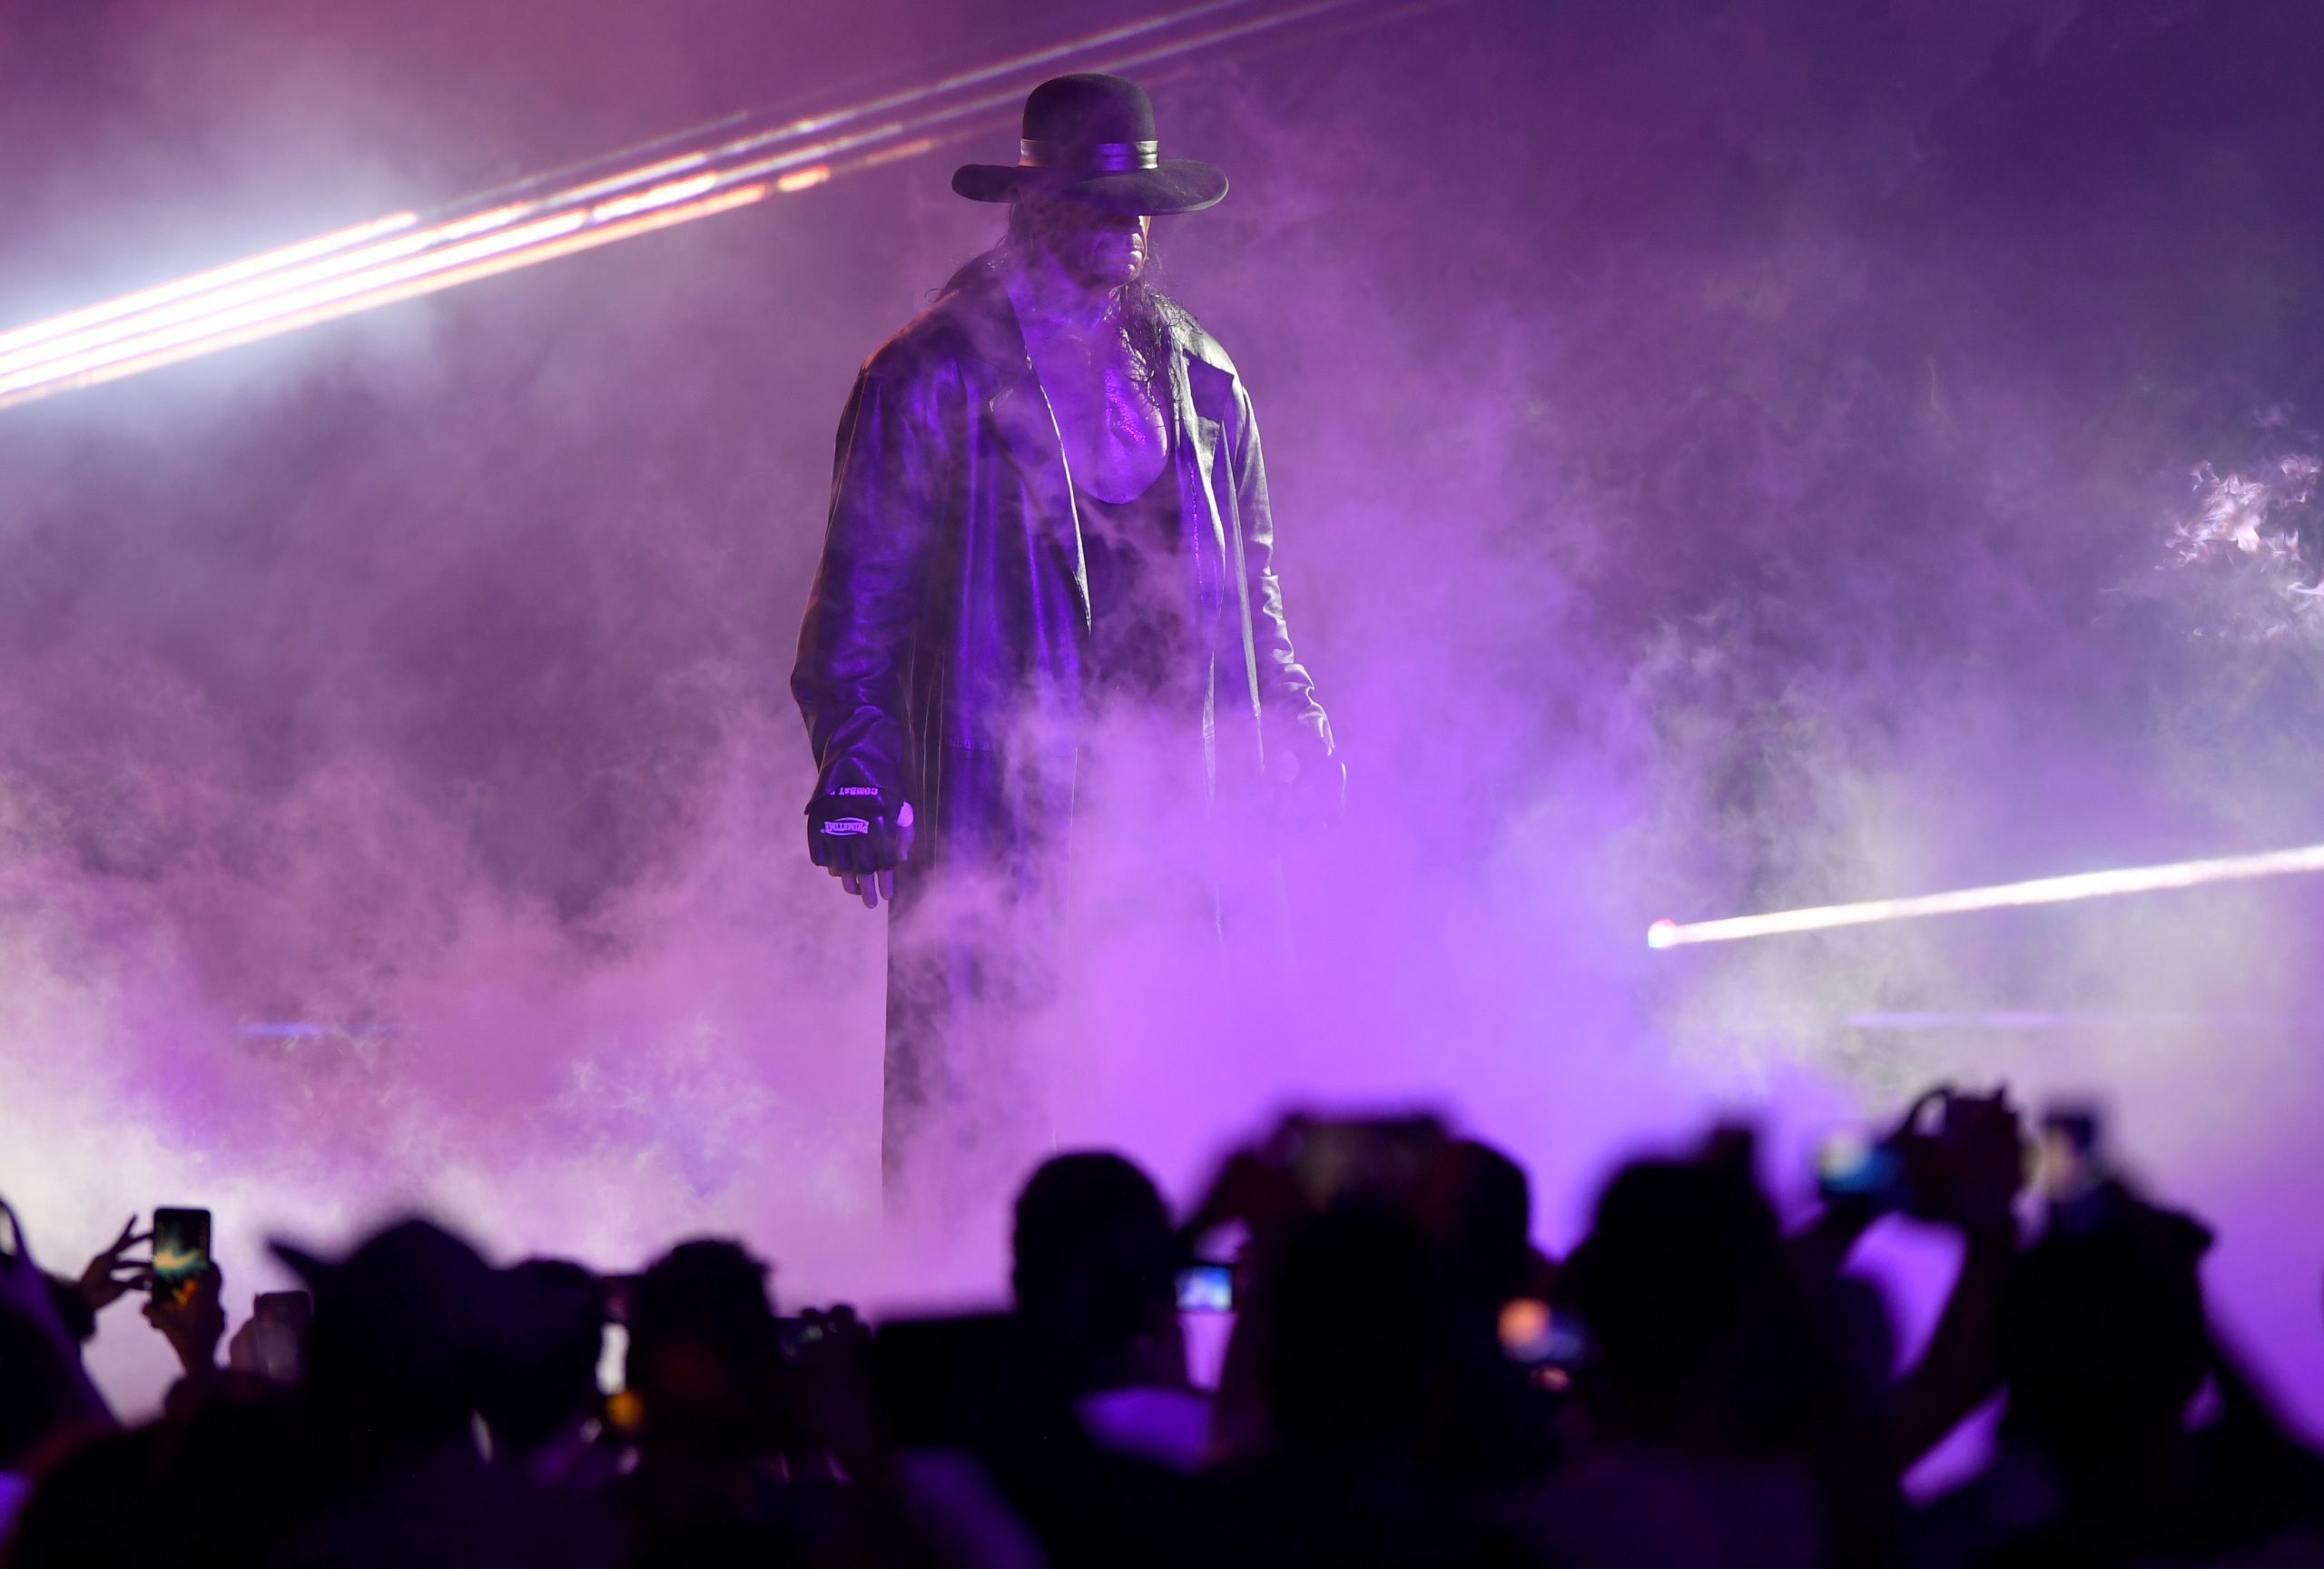 The Undertaker has one of the greatest streaks in WrestleMania history